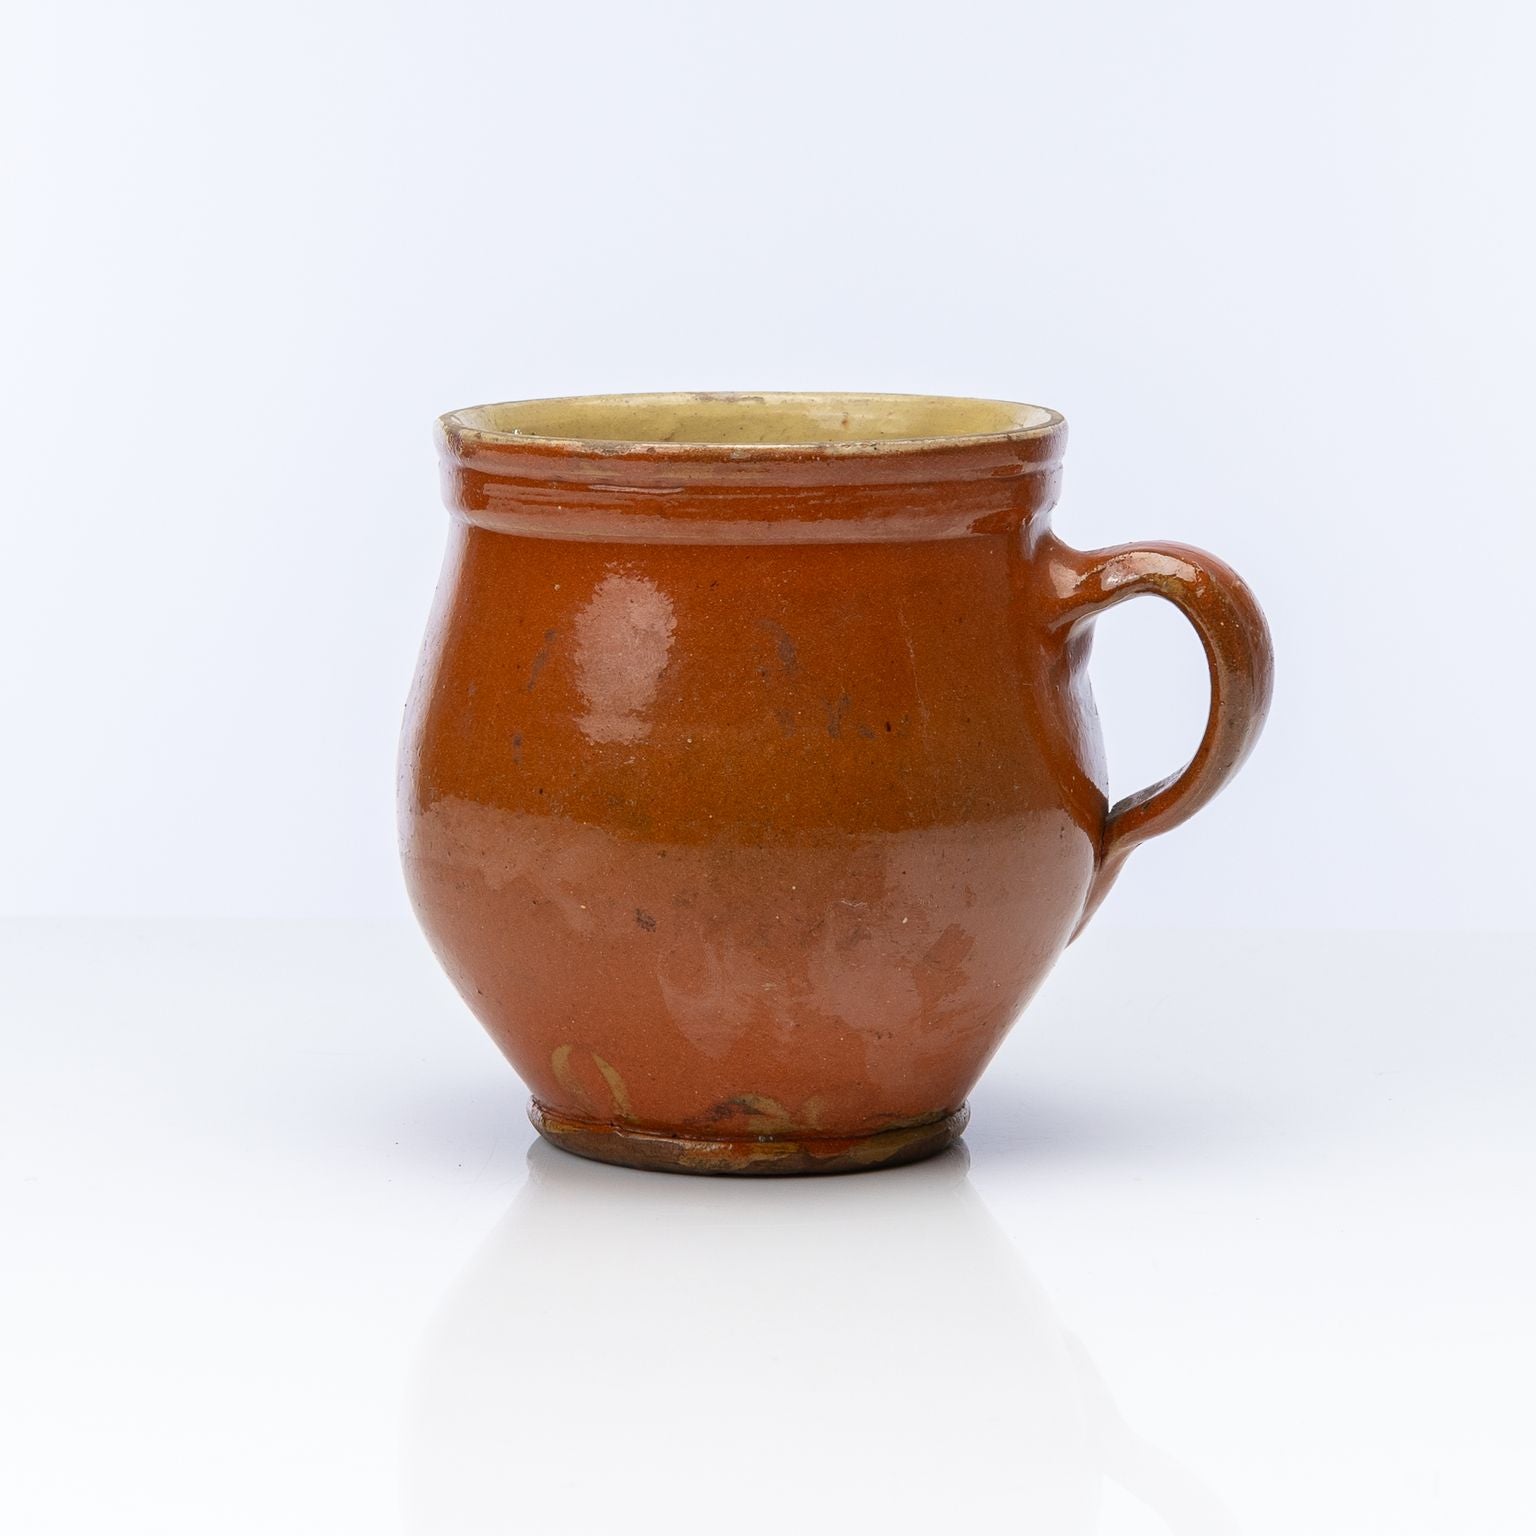 Vintage French glazed pot from The French Alps